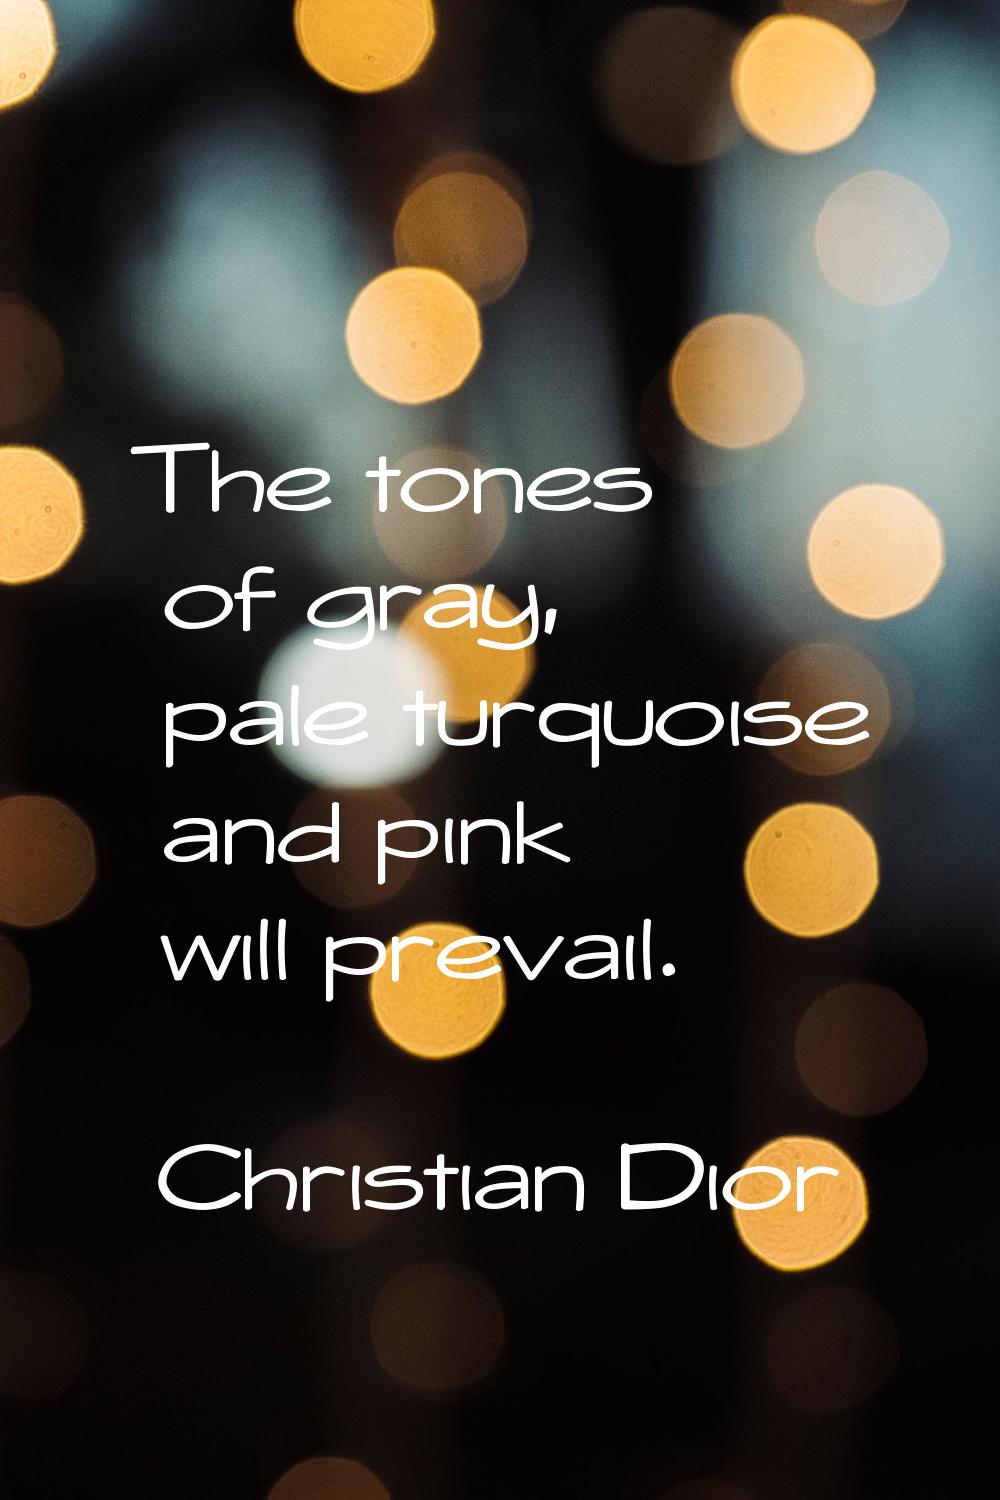 The tones of gray, pale turquoise and pink will prevail.